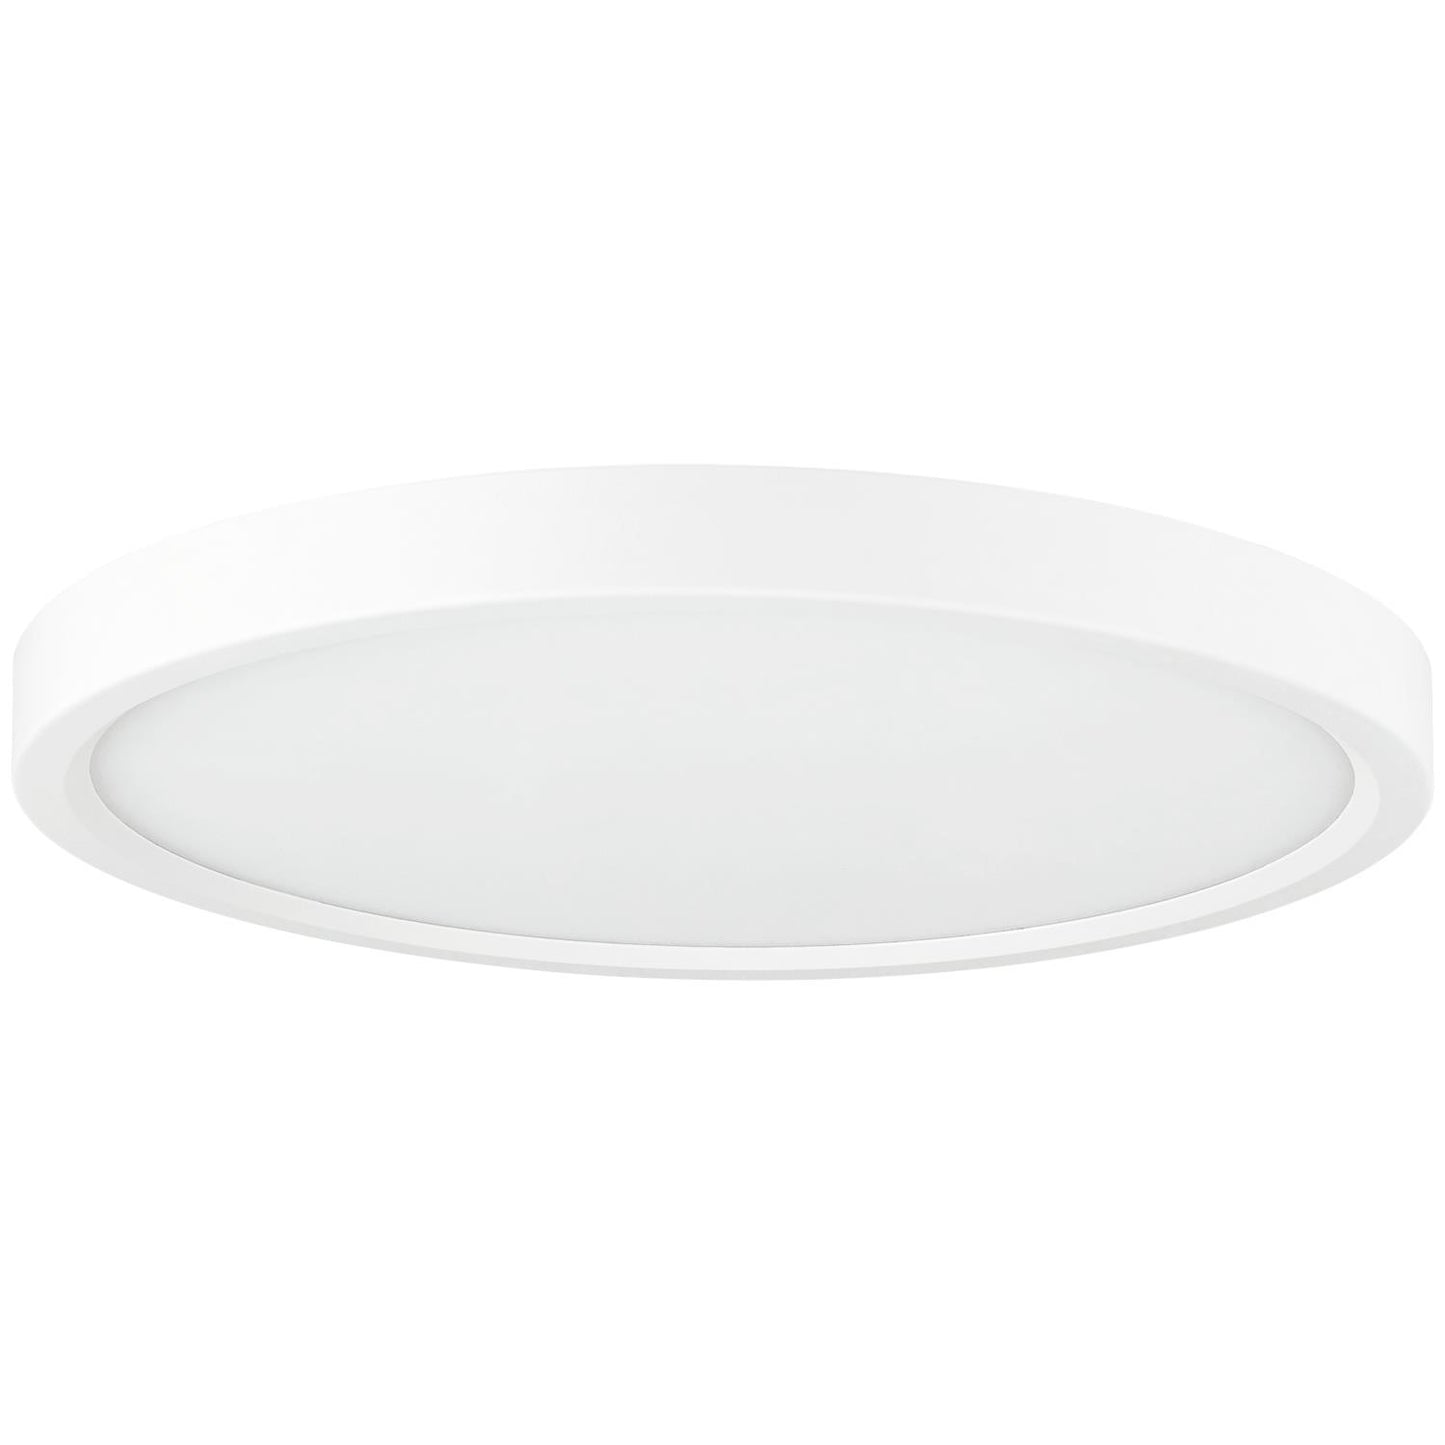 Sunlite Tunable LED 7-Inch Round Surface Mount Ceiling Light Fixture, 15 Watts (75W Equivalent), Dimmable, 30K/40K/50K Tunable Color Temperature, White Finish, ETL Listed